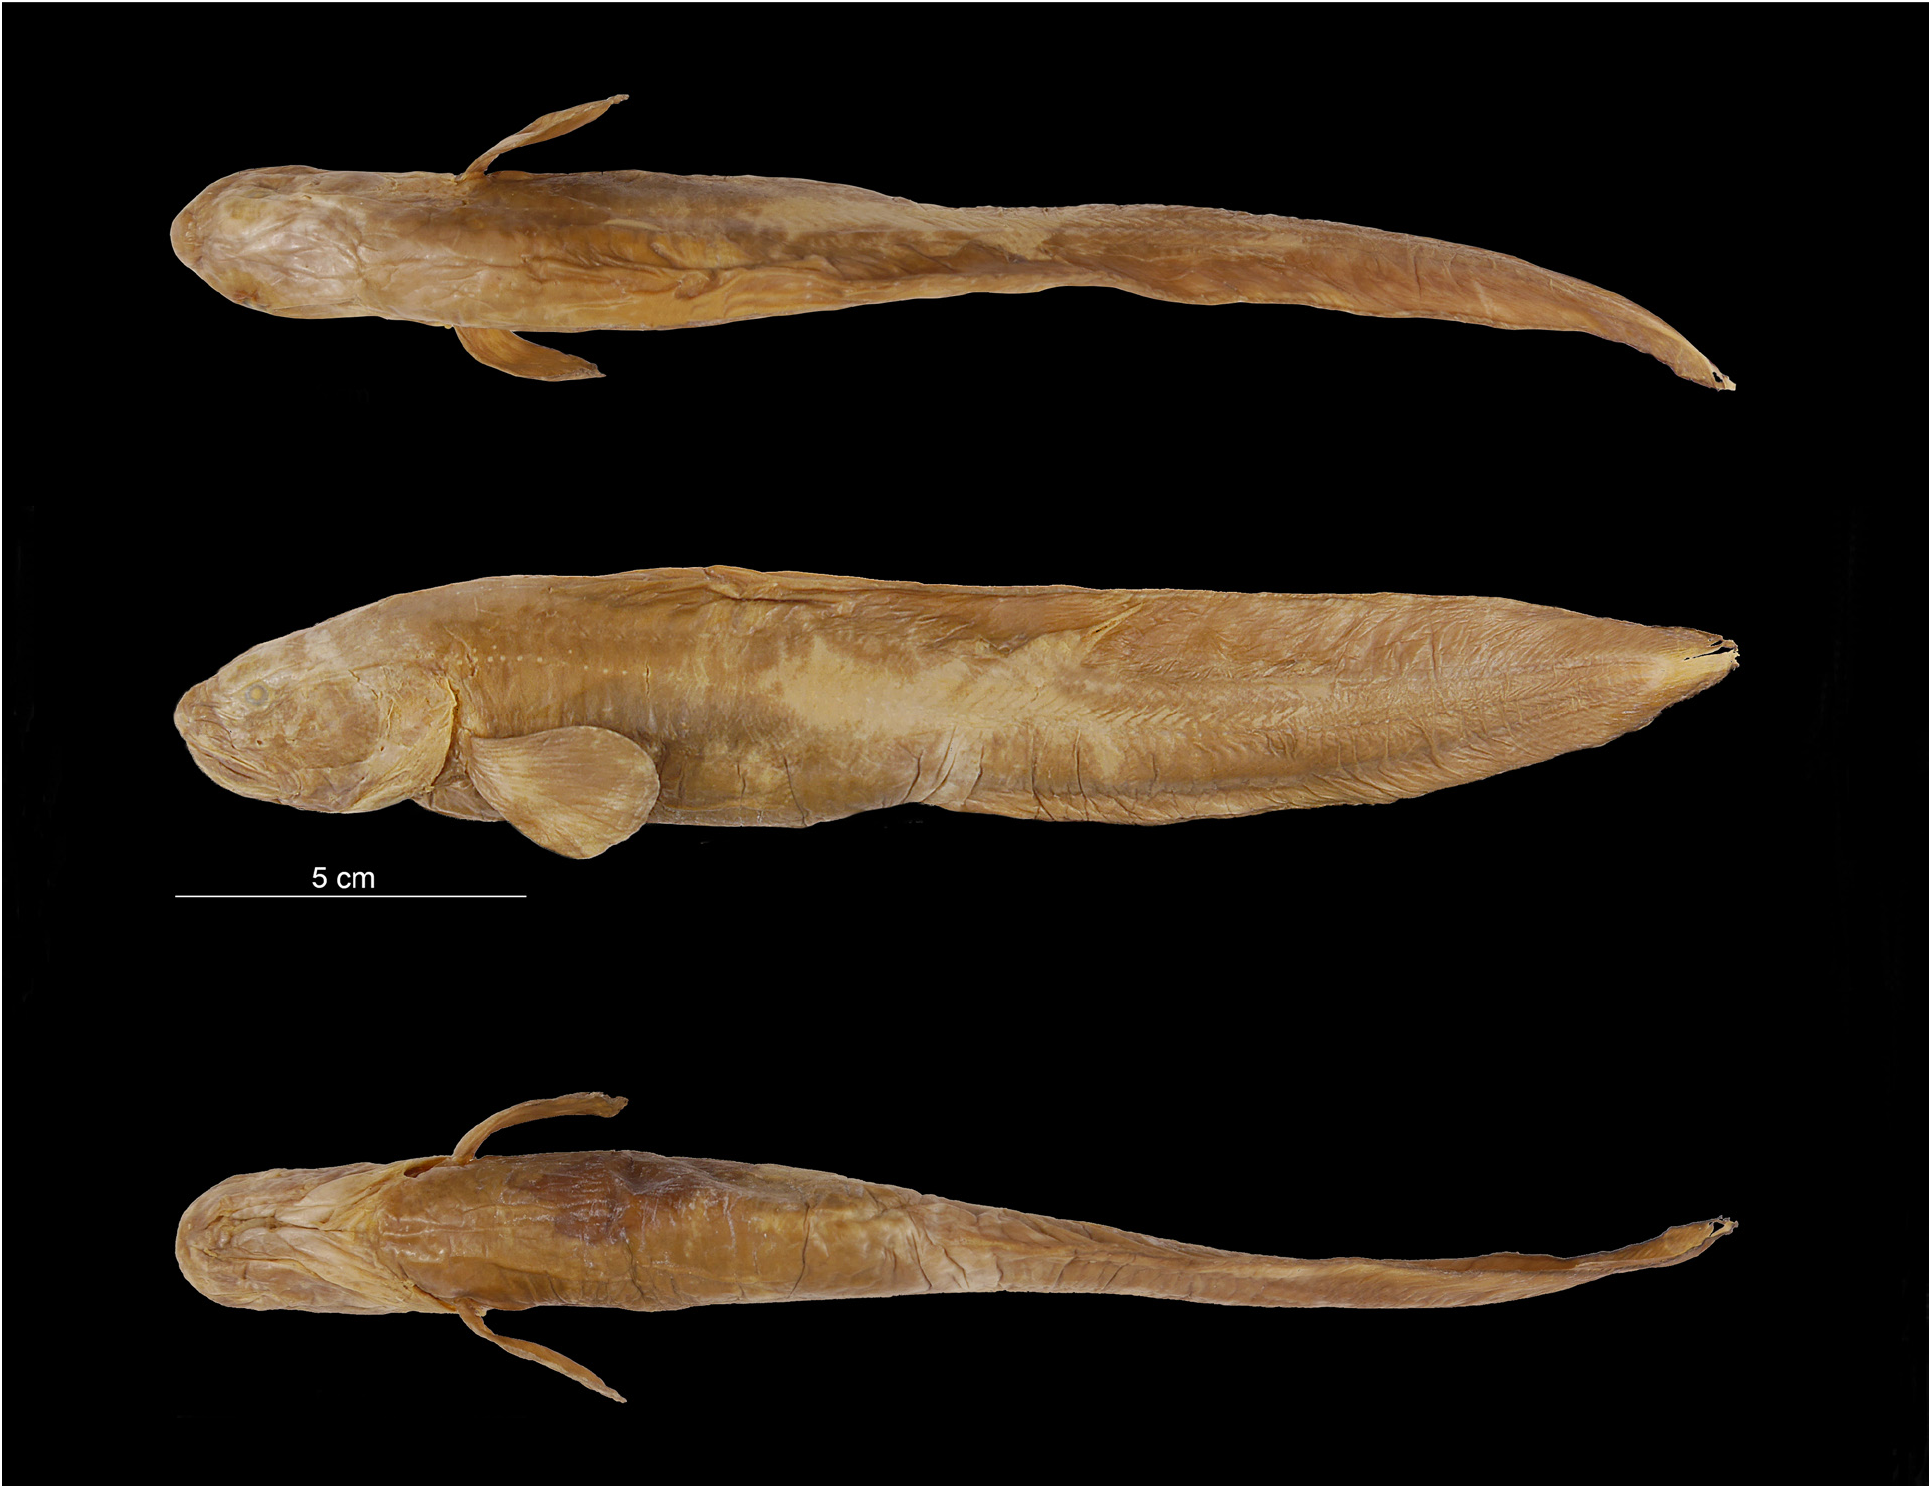 hydrothermal vent eelpout fish